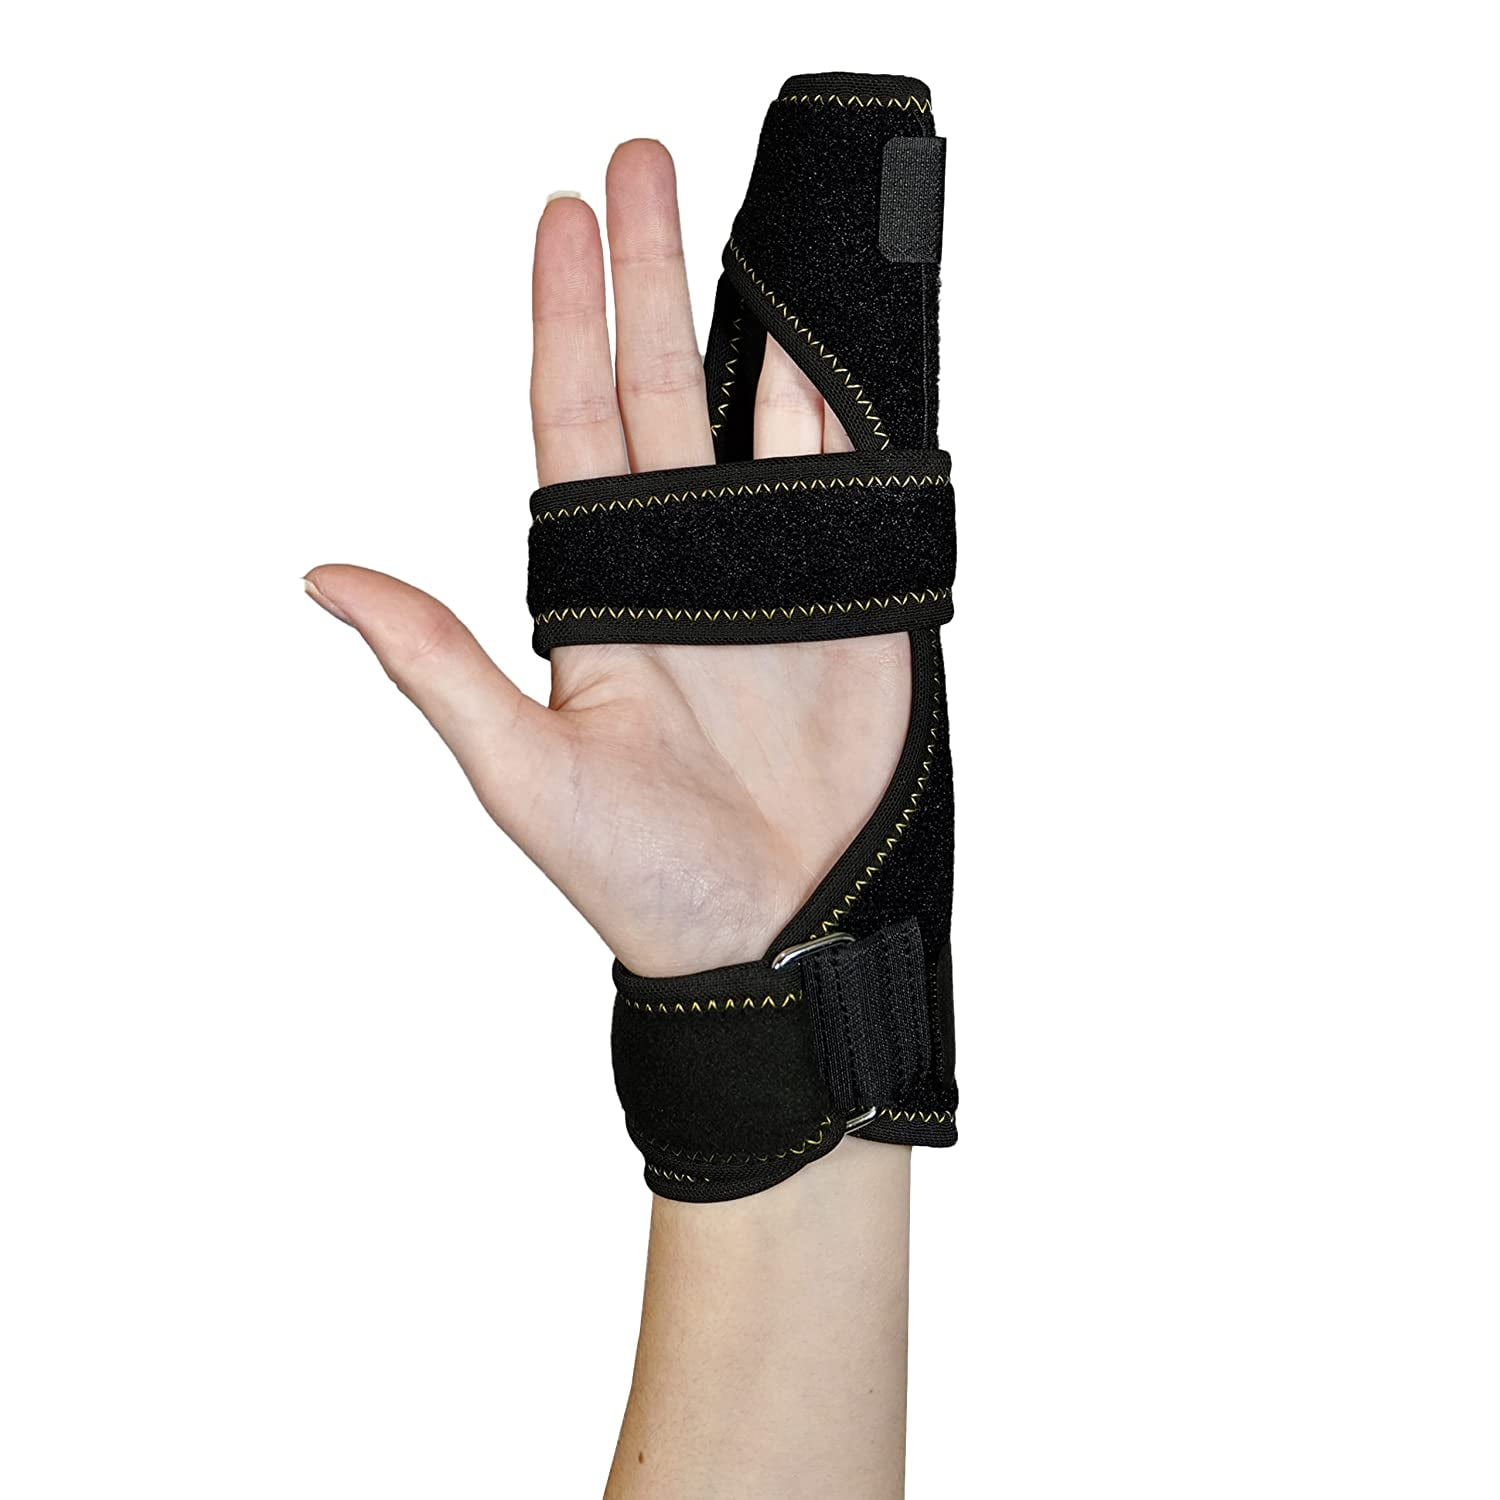 Black The Fracture Recovery Of The Fingers Finger Mover Activity Straight Finger Guard Sleeve Fracture Fixation Splint,Finger Straightening Tendon Release & Pain Relief 